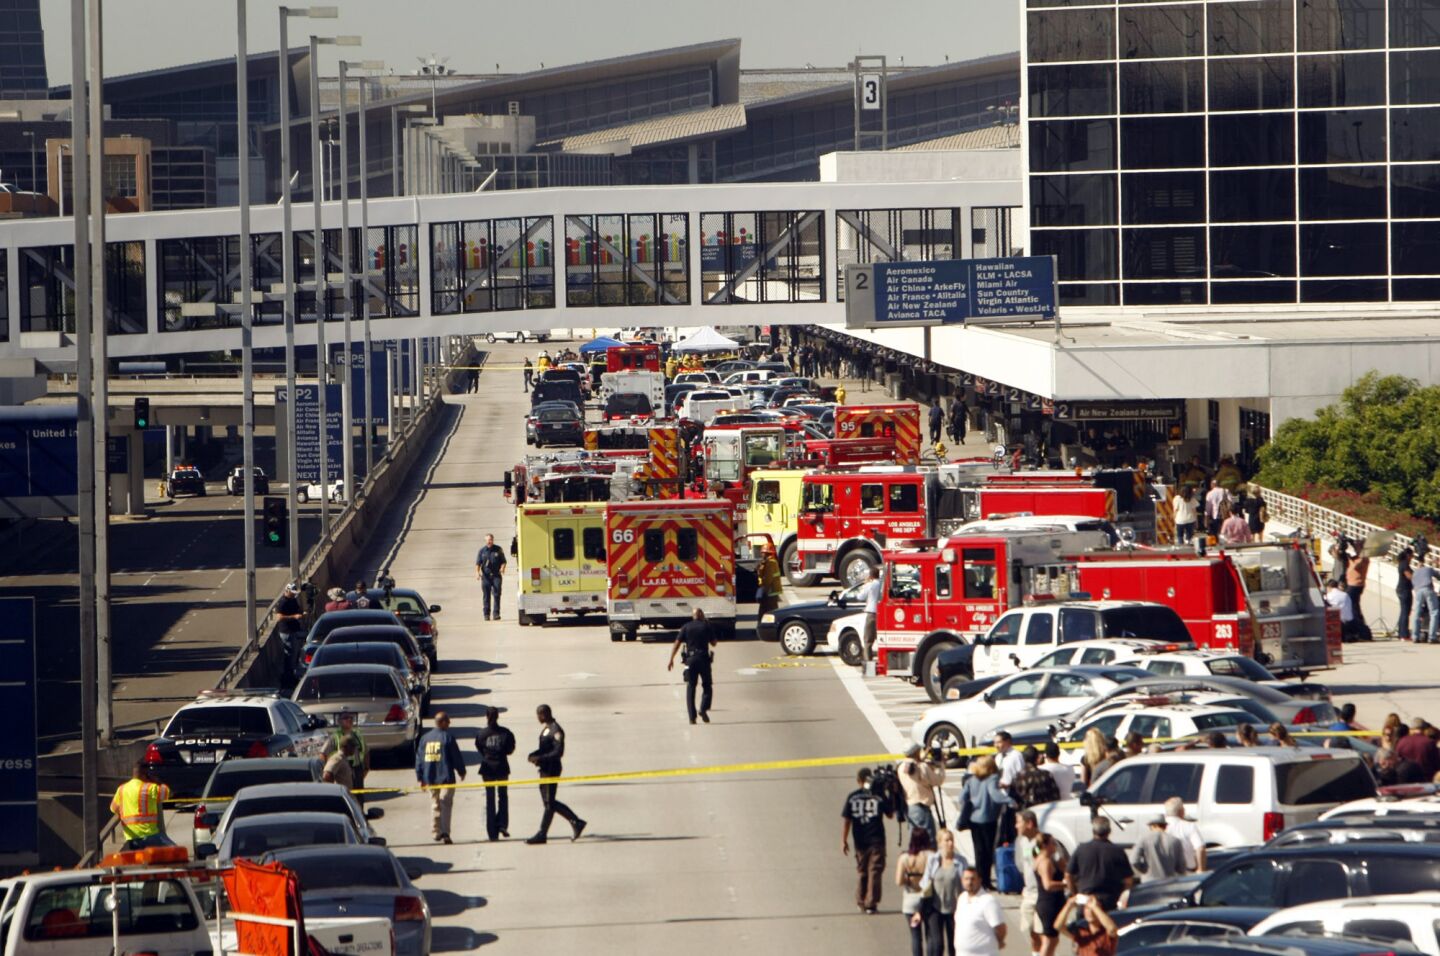 The attack at LAX caused widespread chaos at the airport, with flights delayed and thousand of passengers left stranded on the streets in and around the airport.